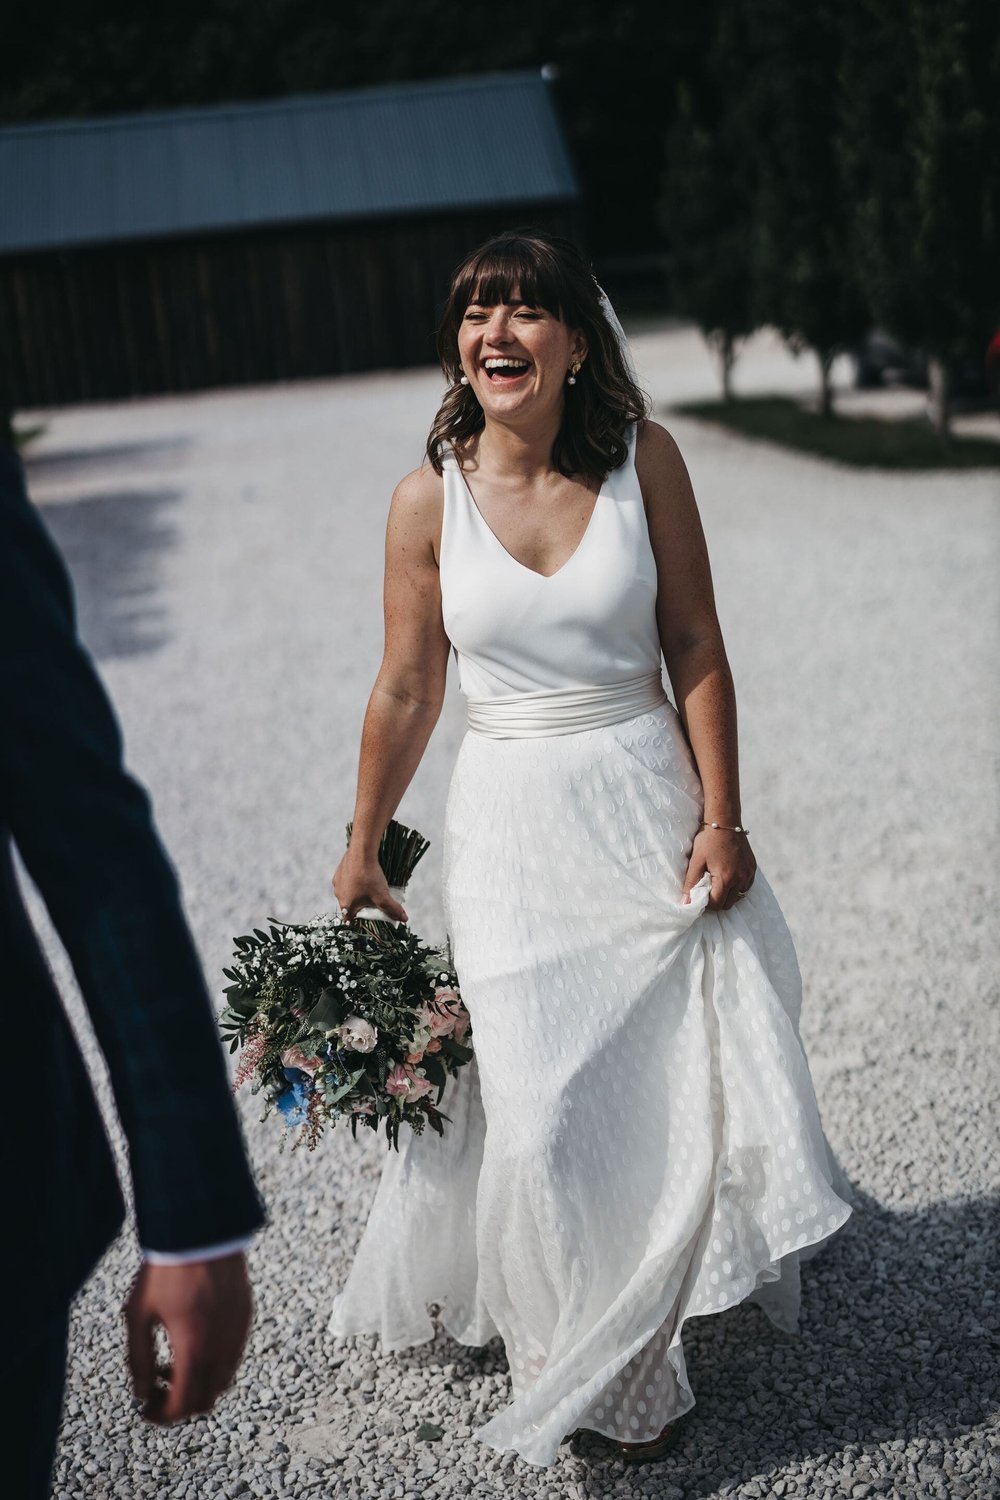  Sarah laughs as she walks outside. Her dress is ivory soft crepe, sleeveless and v neck. She wears a soft chiffon, dotty skirt over her dress with an ivory silk sash tied around her waist. 